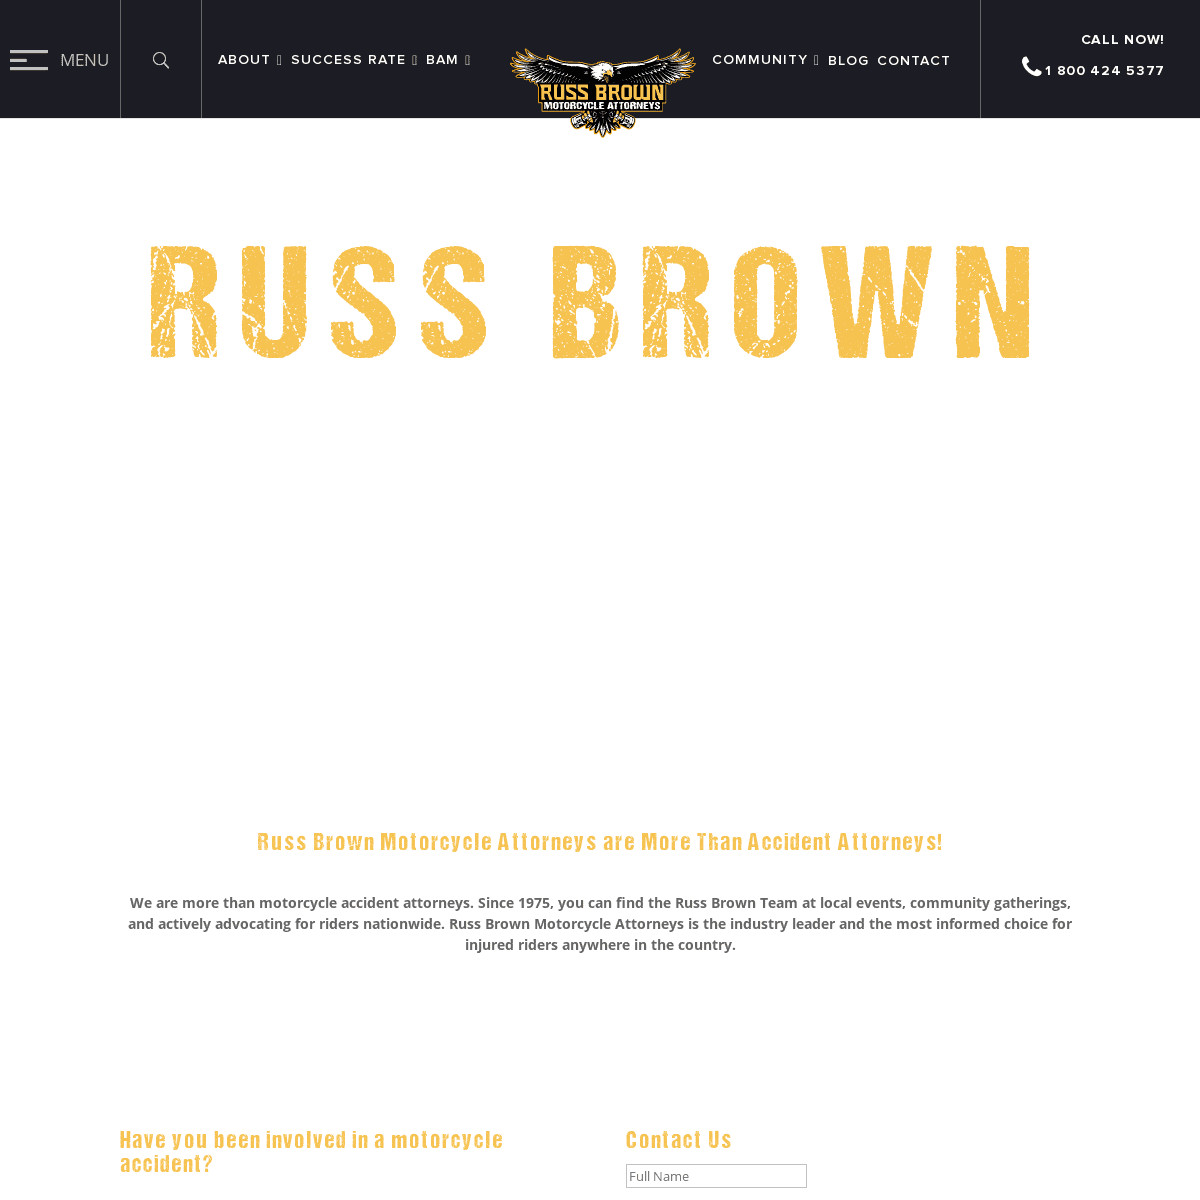 A complete backup of https://russbrown.com